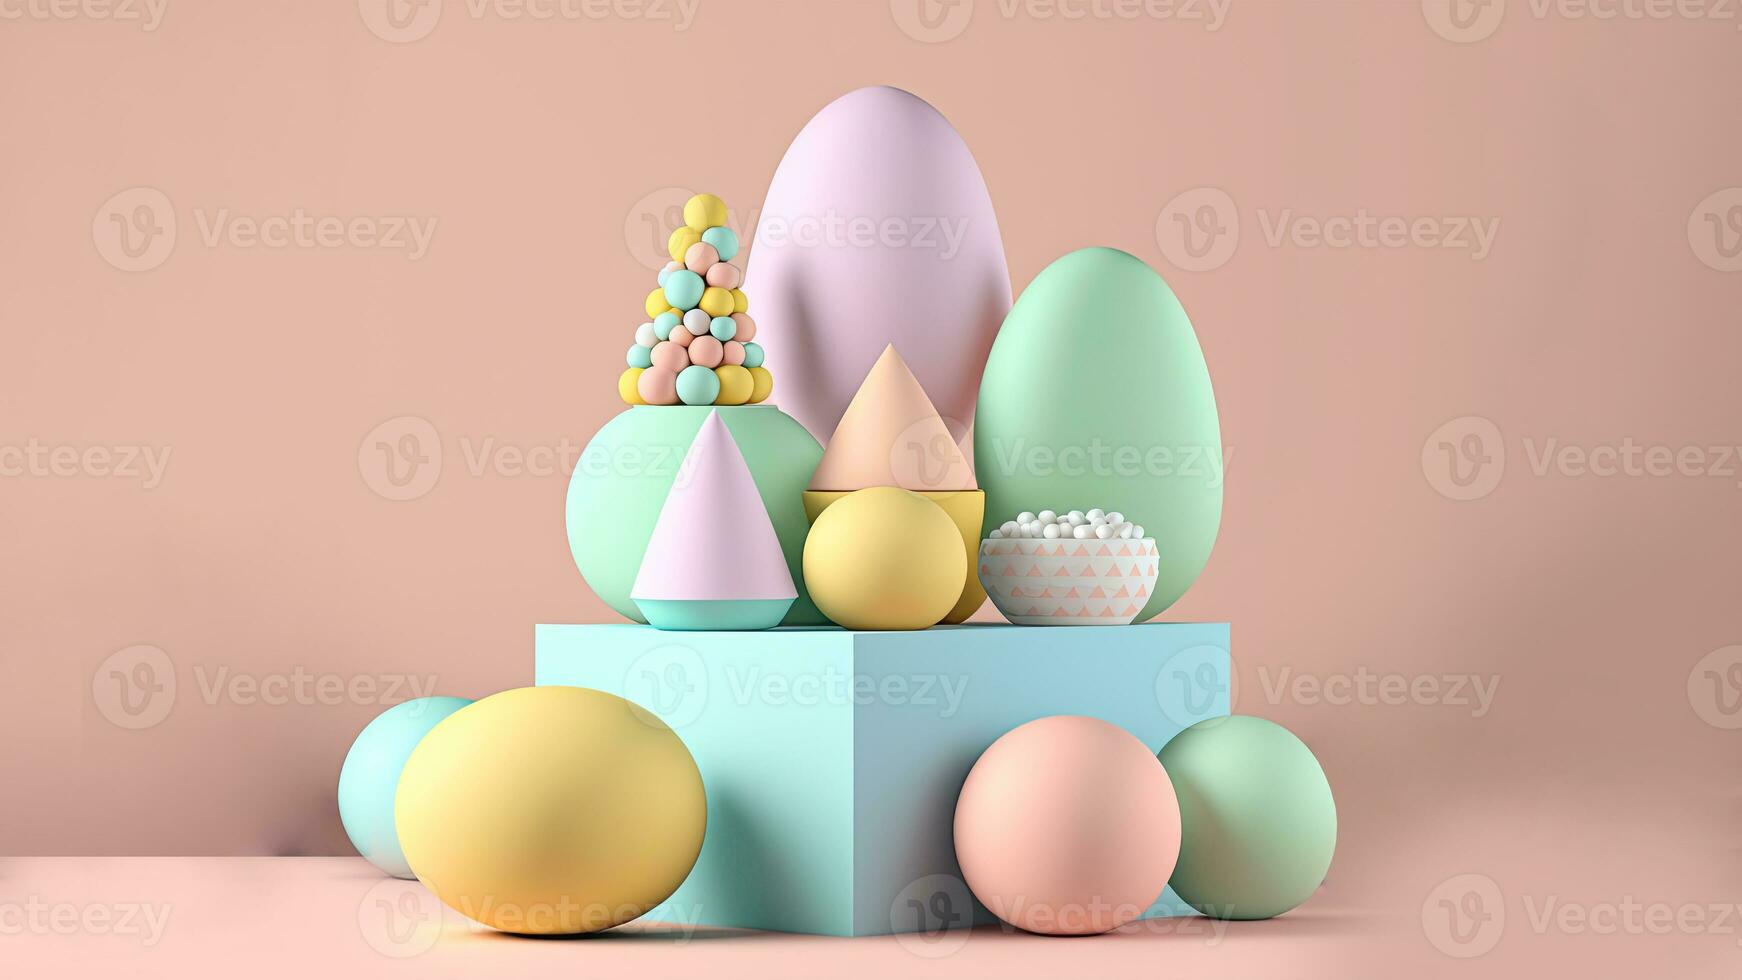 3D Render of Soft Color Eggs With Gometric Shapes On Podium And Copy Space. Happy Easter Day Concept. photo